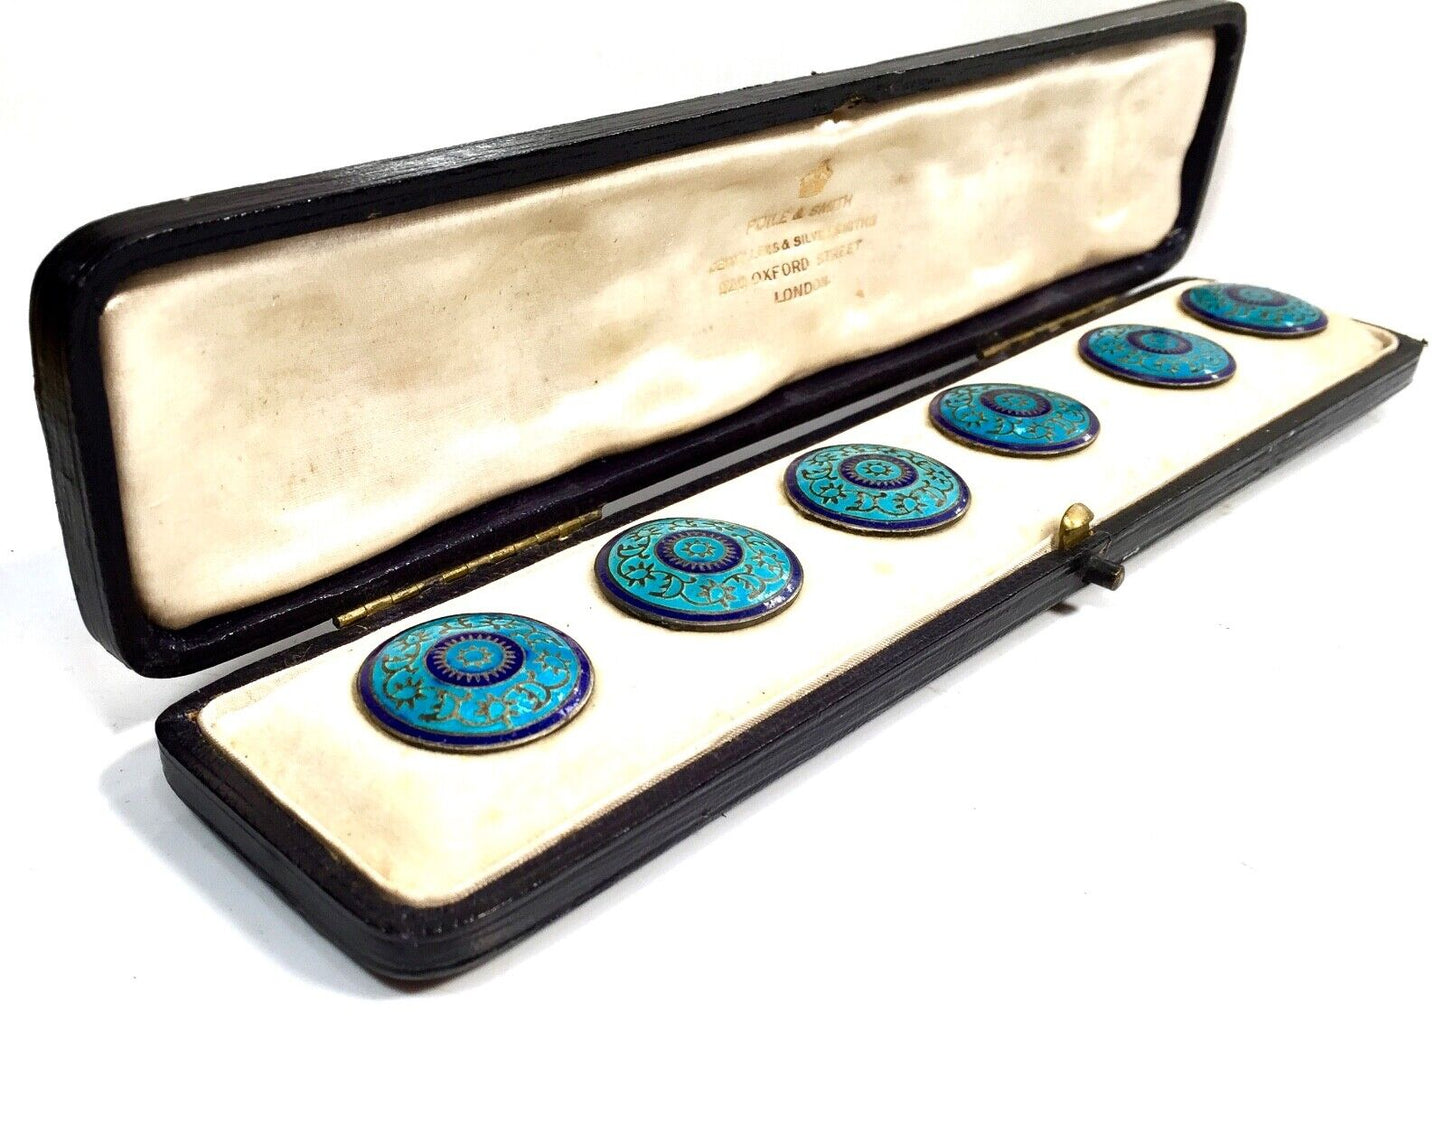 Antique Edwardian Enamel Buttons by Poile & Smith Jewellers, 520 Oxford Street